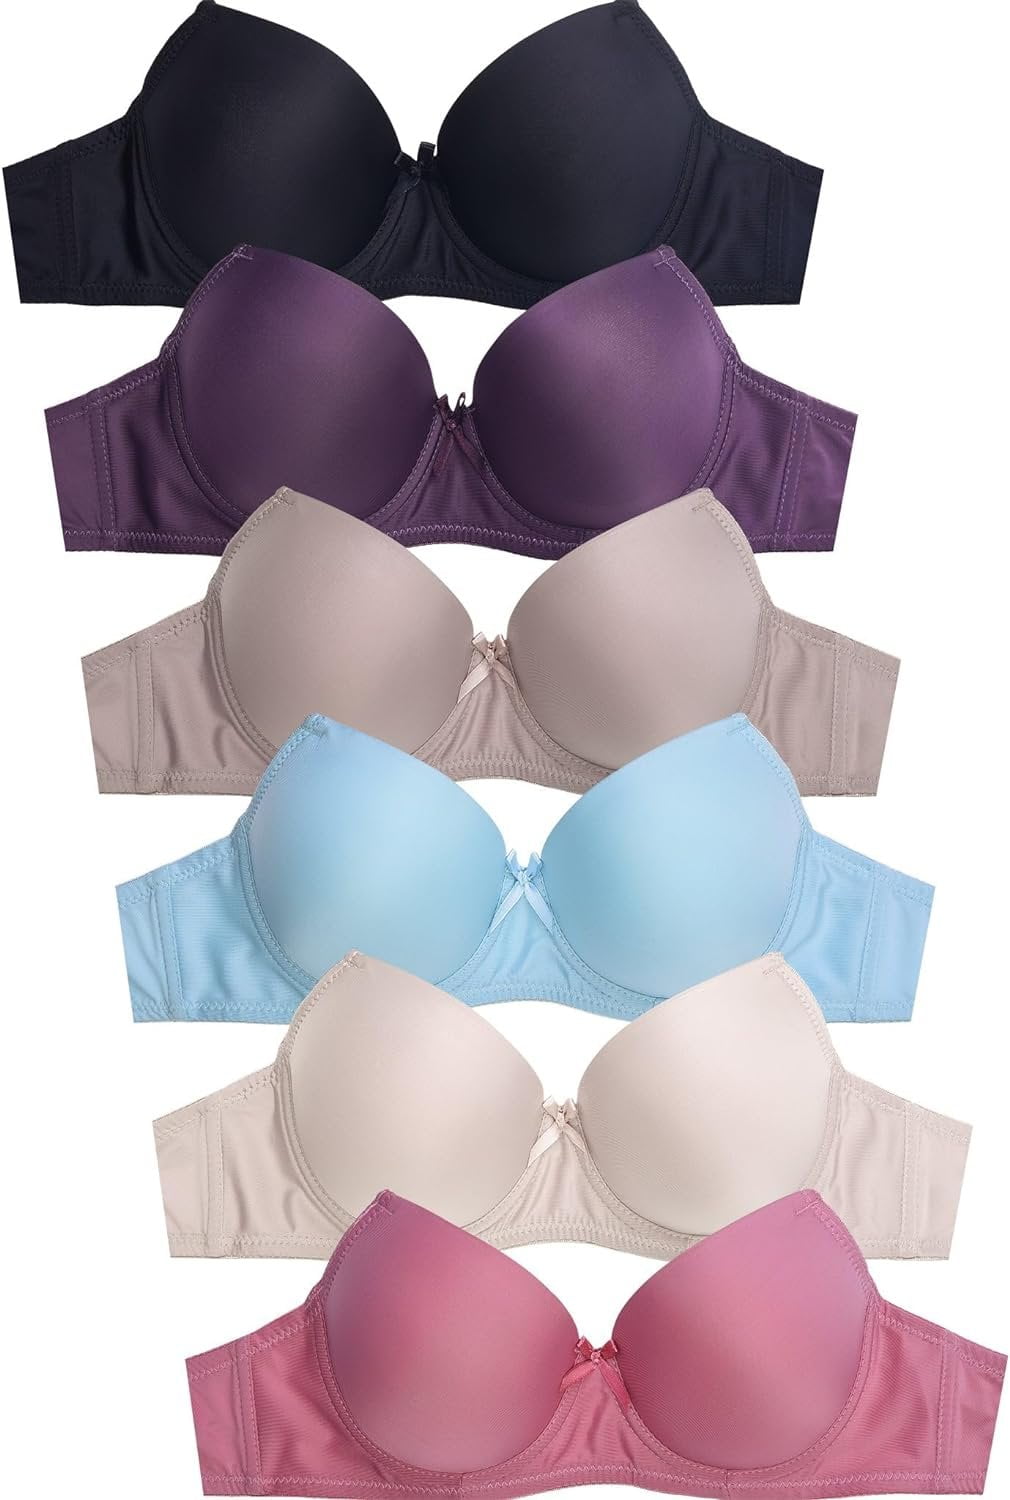 Bra Combo Pack 6 Only For Hot Deals*